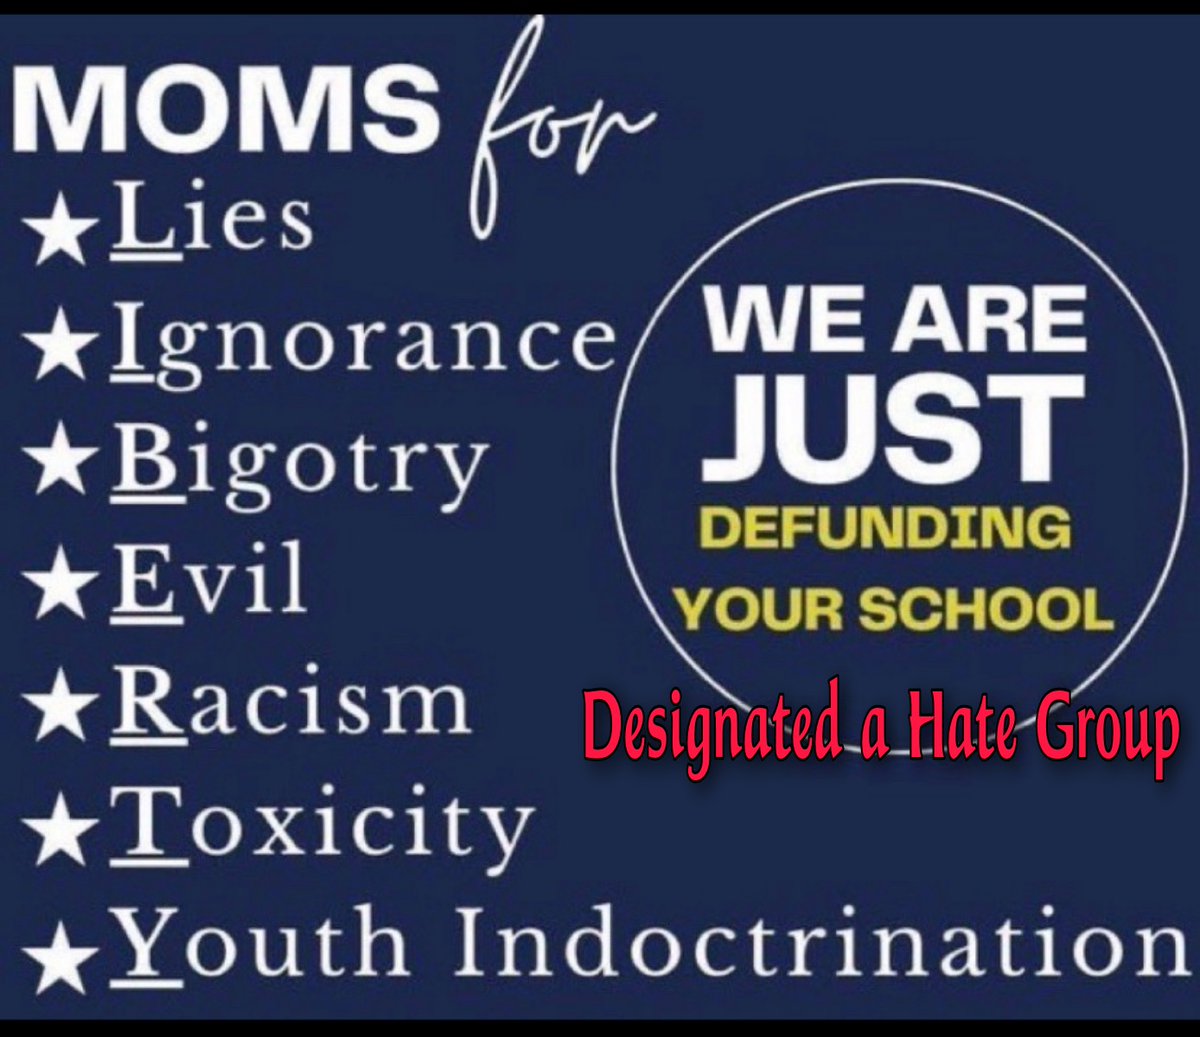 Here's one of these group's #Moms4Liberty we've all heard about bc of their fondness for #Hitler quotations.  They'll be at #SchoolBoardMtgs demanding #BookBans #discrimination of #LGBTIQ #BlackHistory #DragShows #WokeMaps end